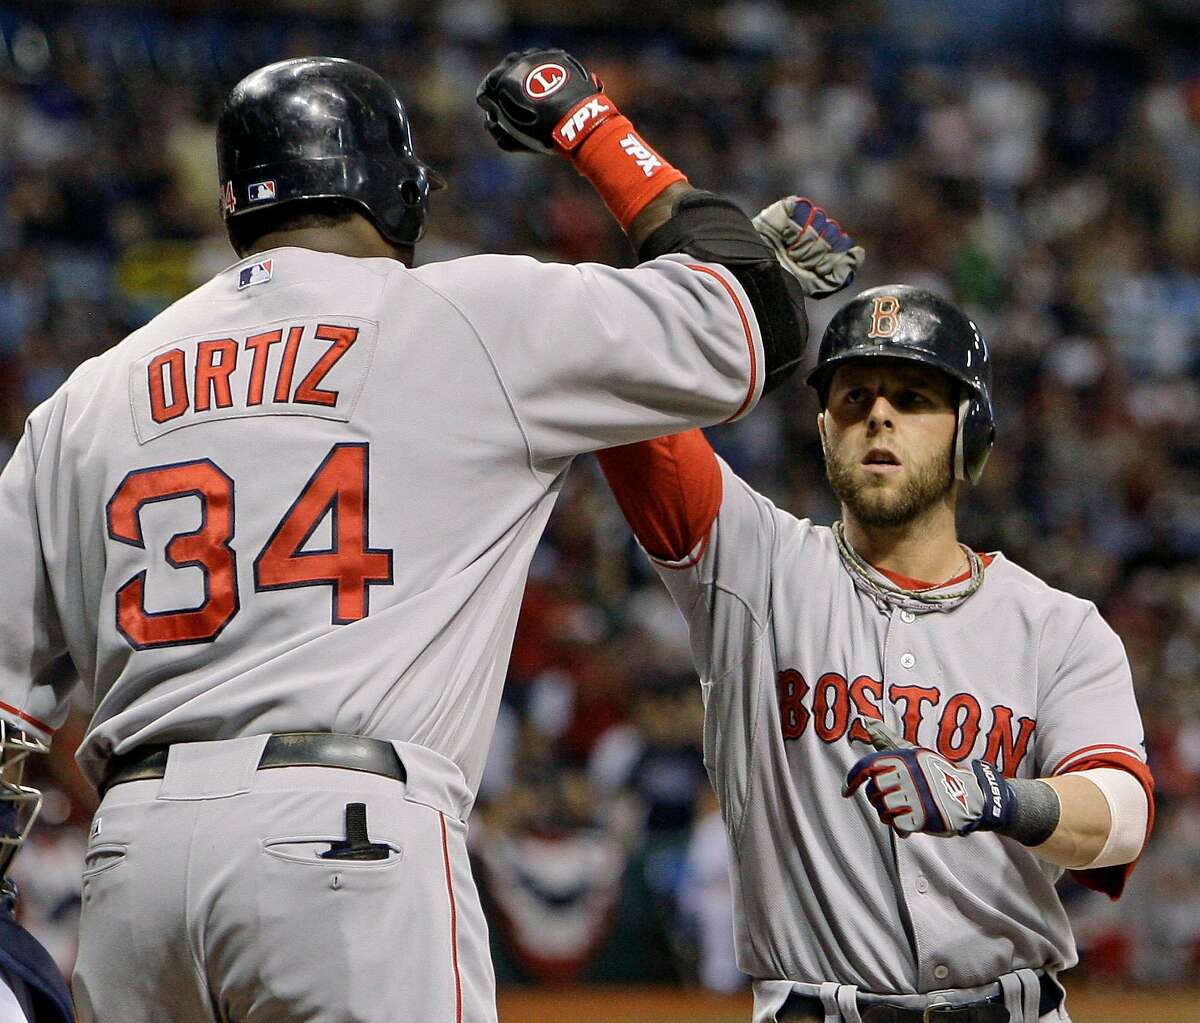 Everybody has their Pedroia stories.' Here are some of the best